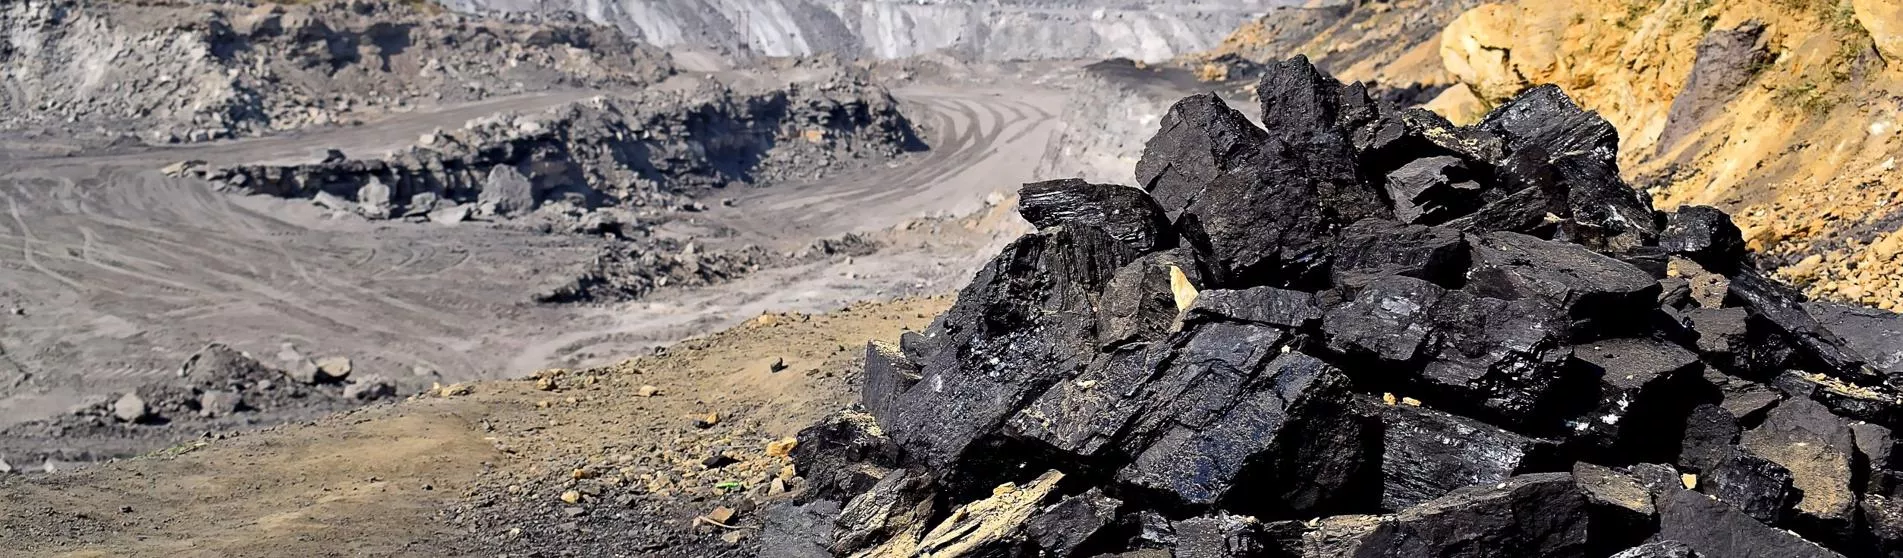 Coal mining project, West Bengal India